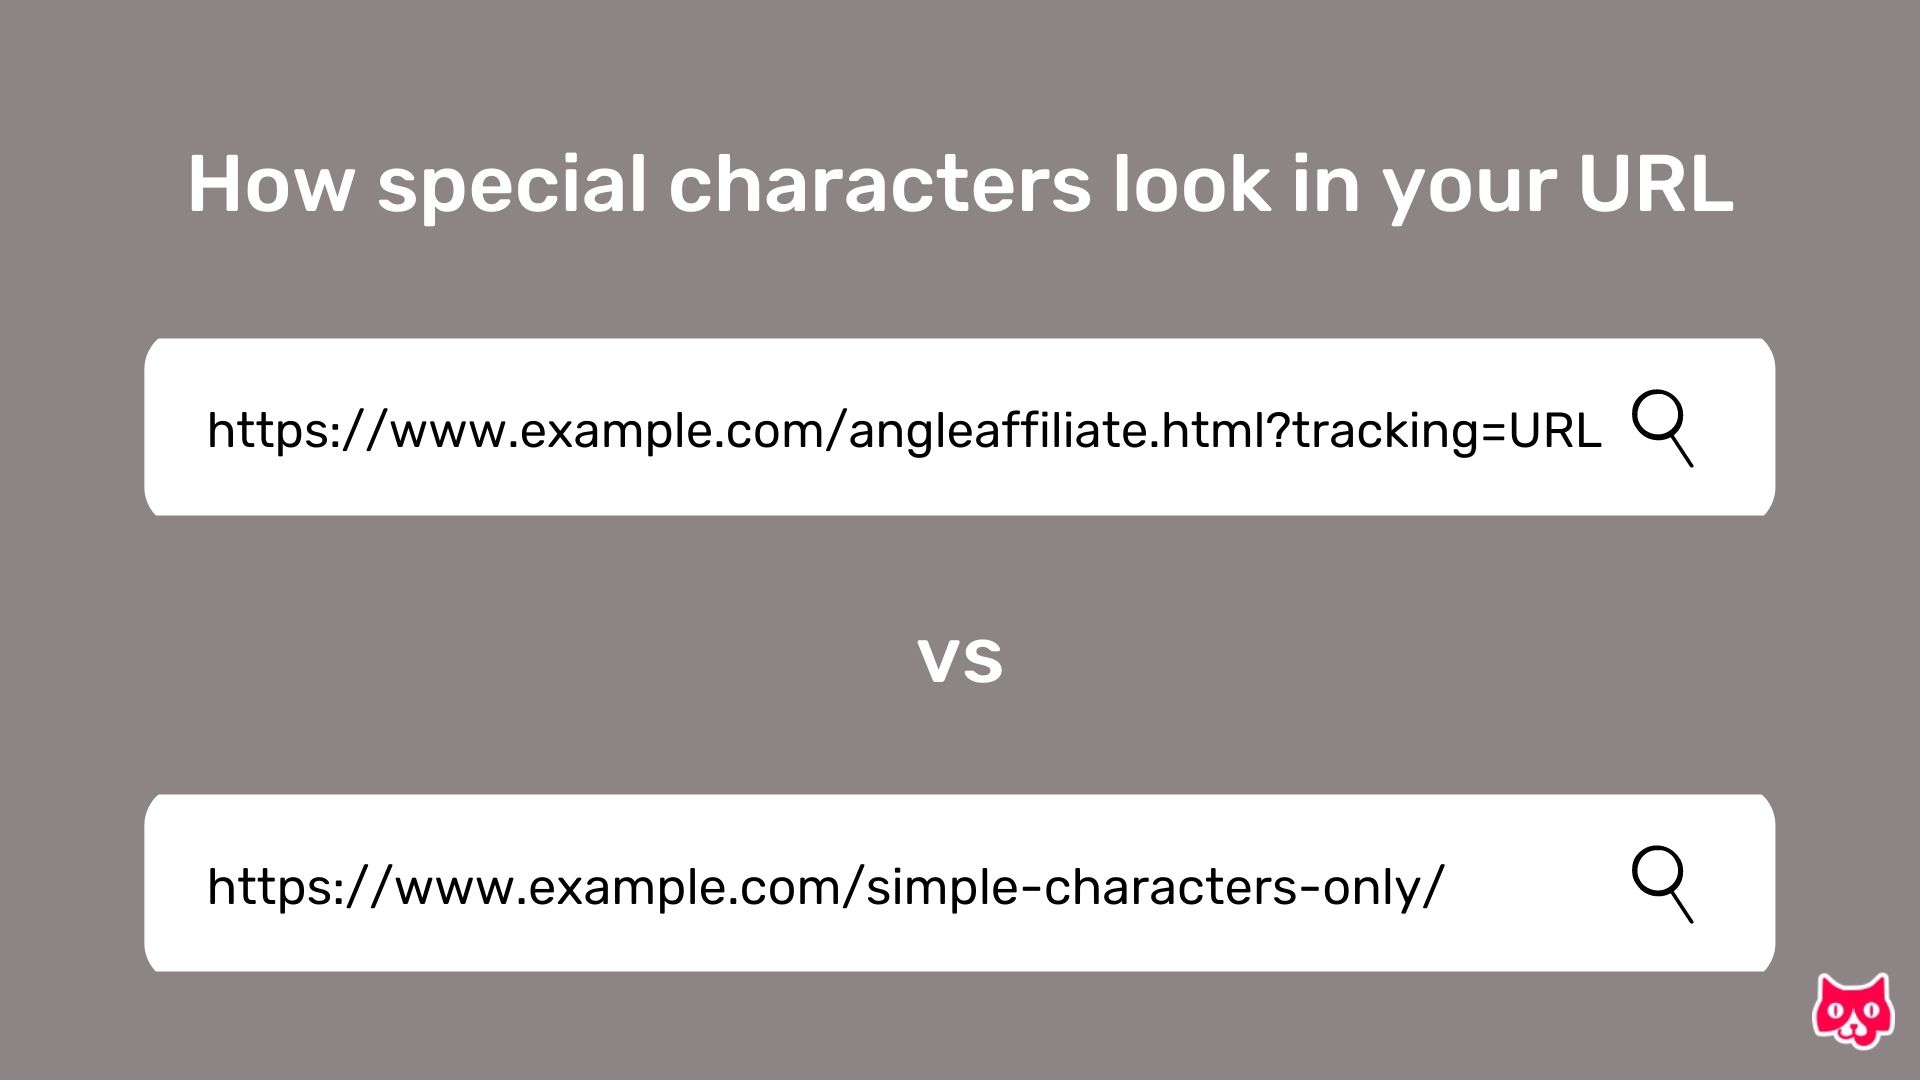 This image has a gray background and a header that reads 'how special characters look in your URL' The top white search bar has a link which is messy and stuffy. Between the two search bar is a 'VS', versus. The bottom link is simple and the permalink is only comprised of 'simple-characters-only/'